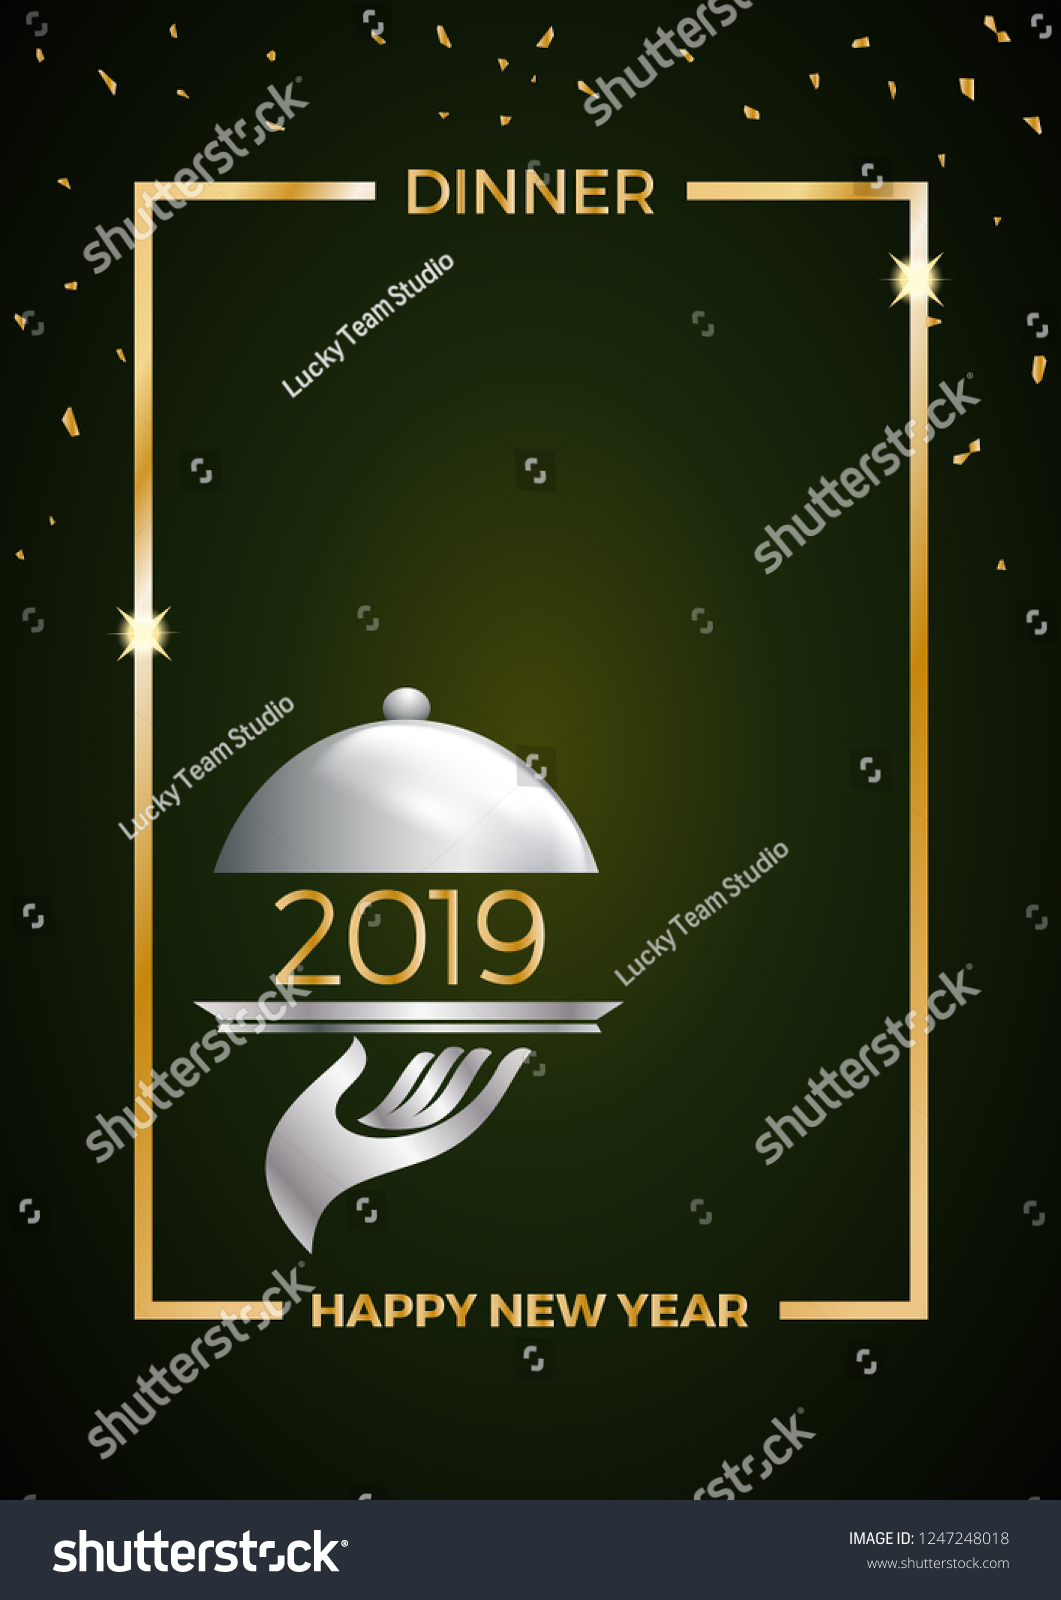 2019 New Years Eve Dinner Template Stock Vector (Royalty In New Years Eve Menu Template